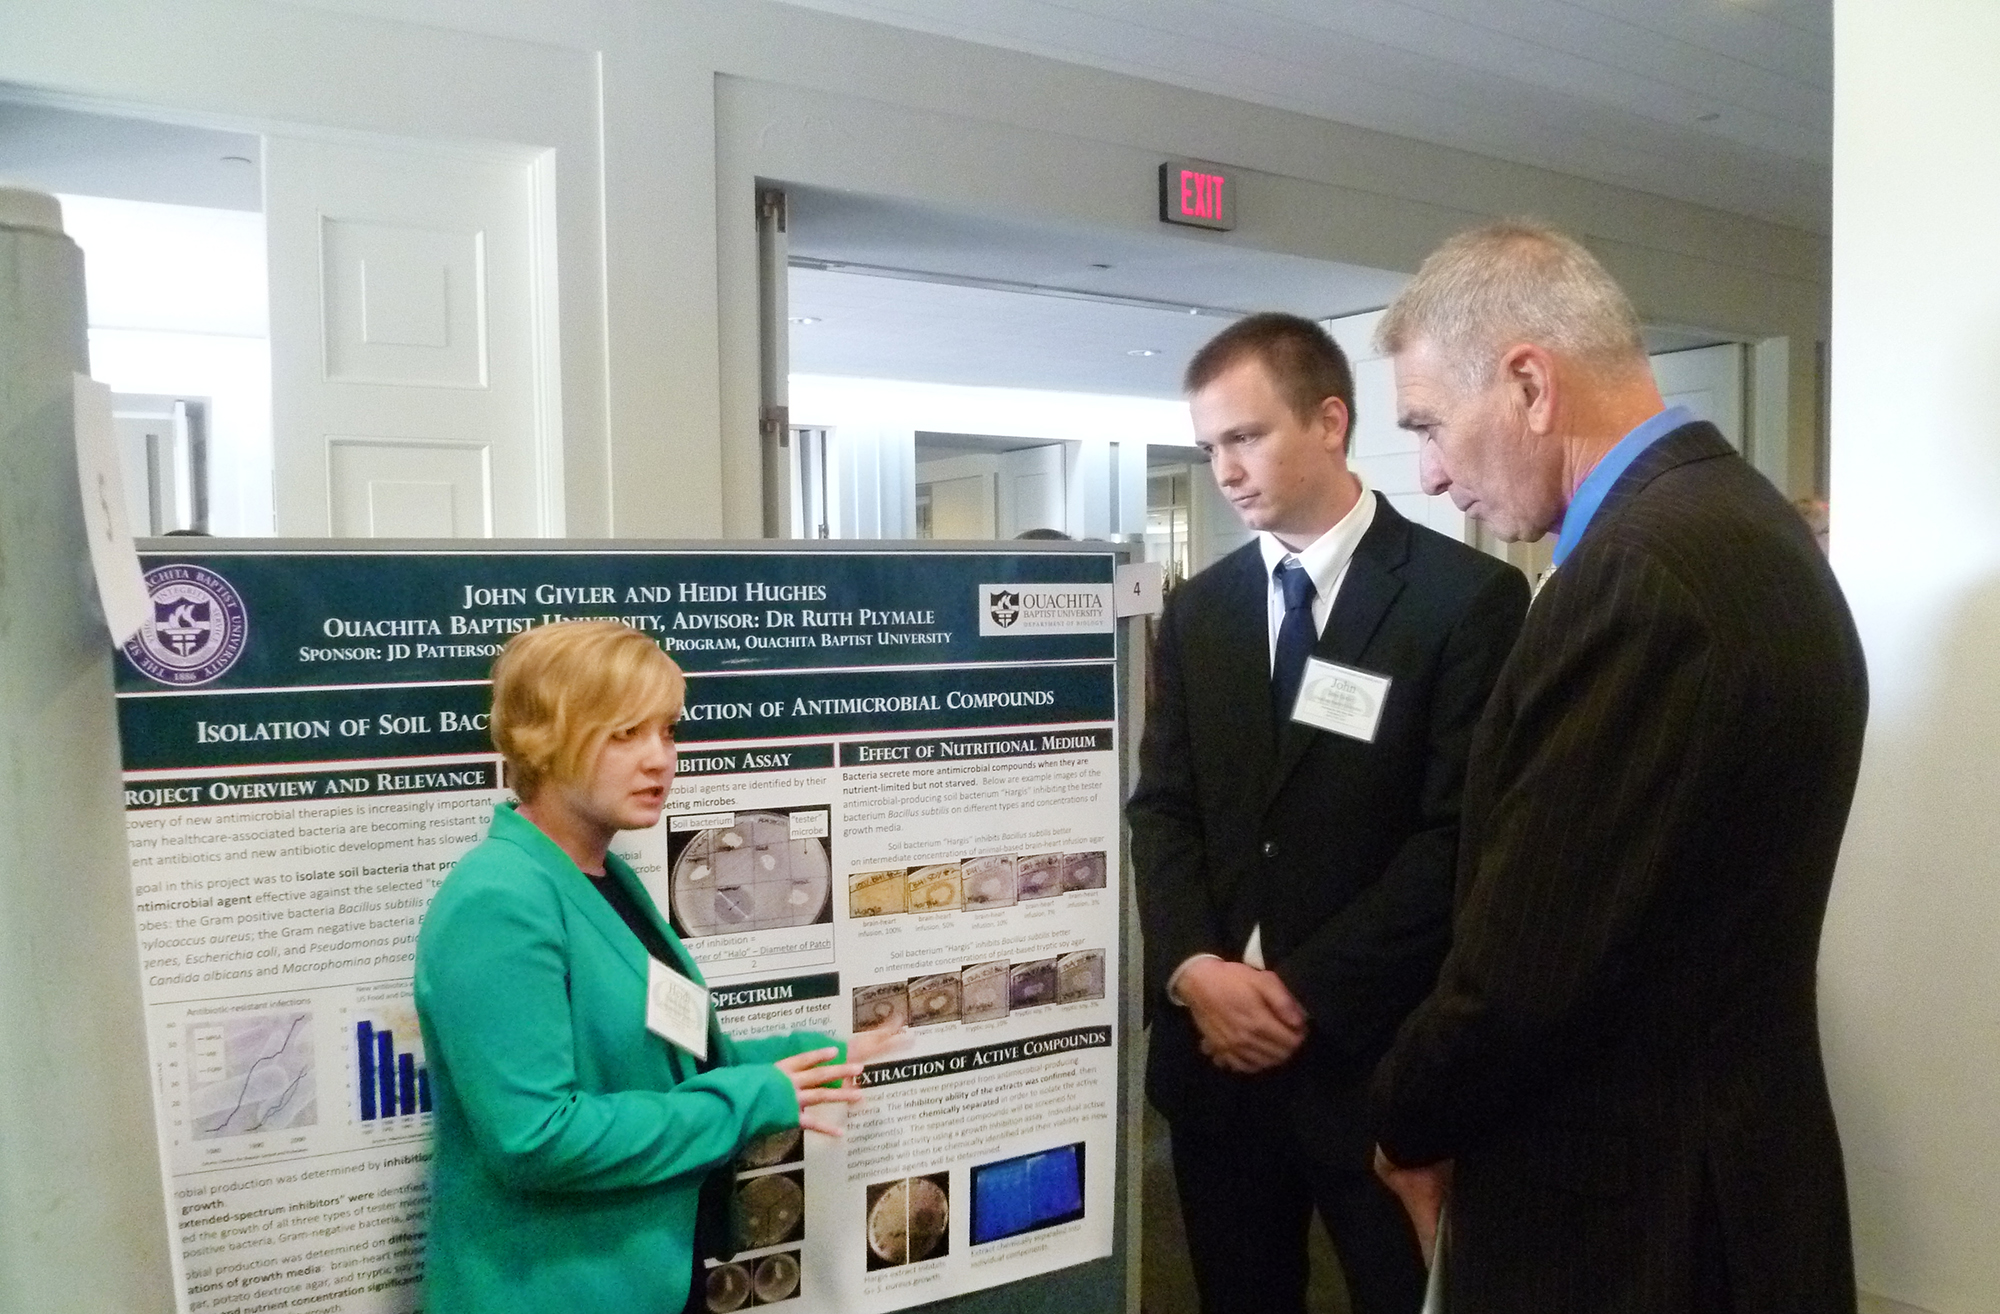 Rep. Ralph Abraham of Louisiana listens while Heidi Hughes and John Givler of Ouachita Baptist University present their research at the 20th annual Posters on the Hill event in Washington, D.C.